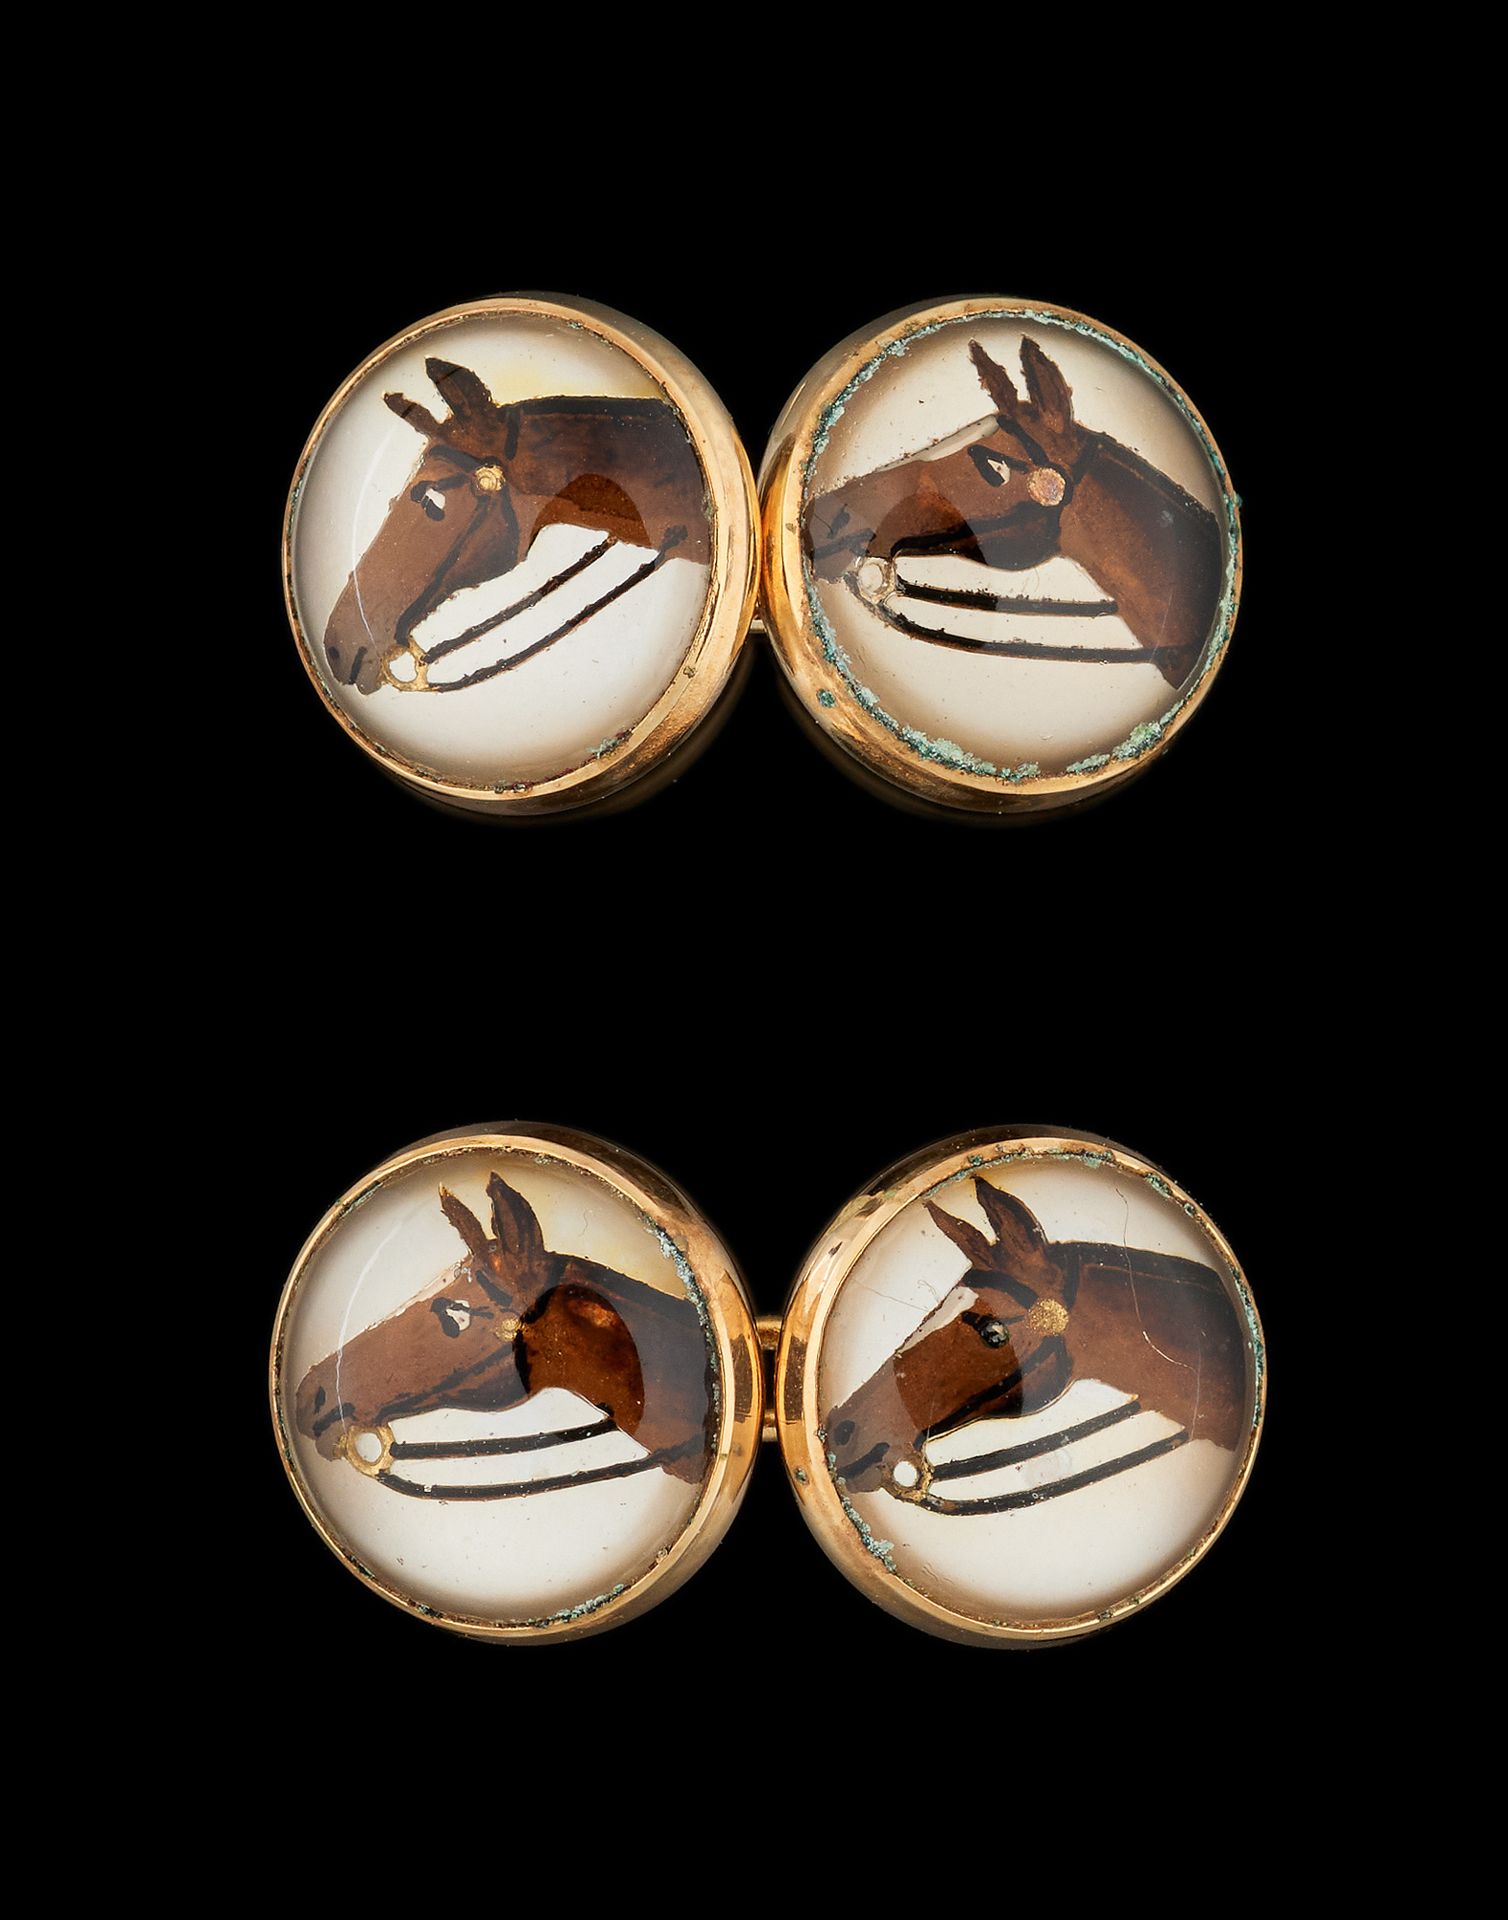 Joaillerie. Jewelry: Pair of cufflinks with English crystals and horses.